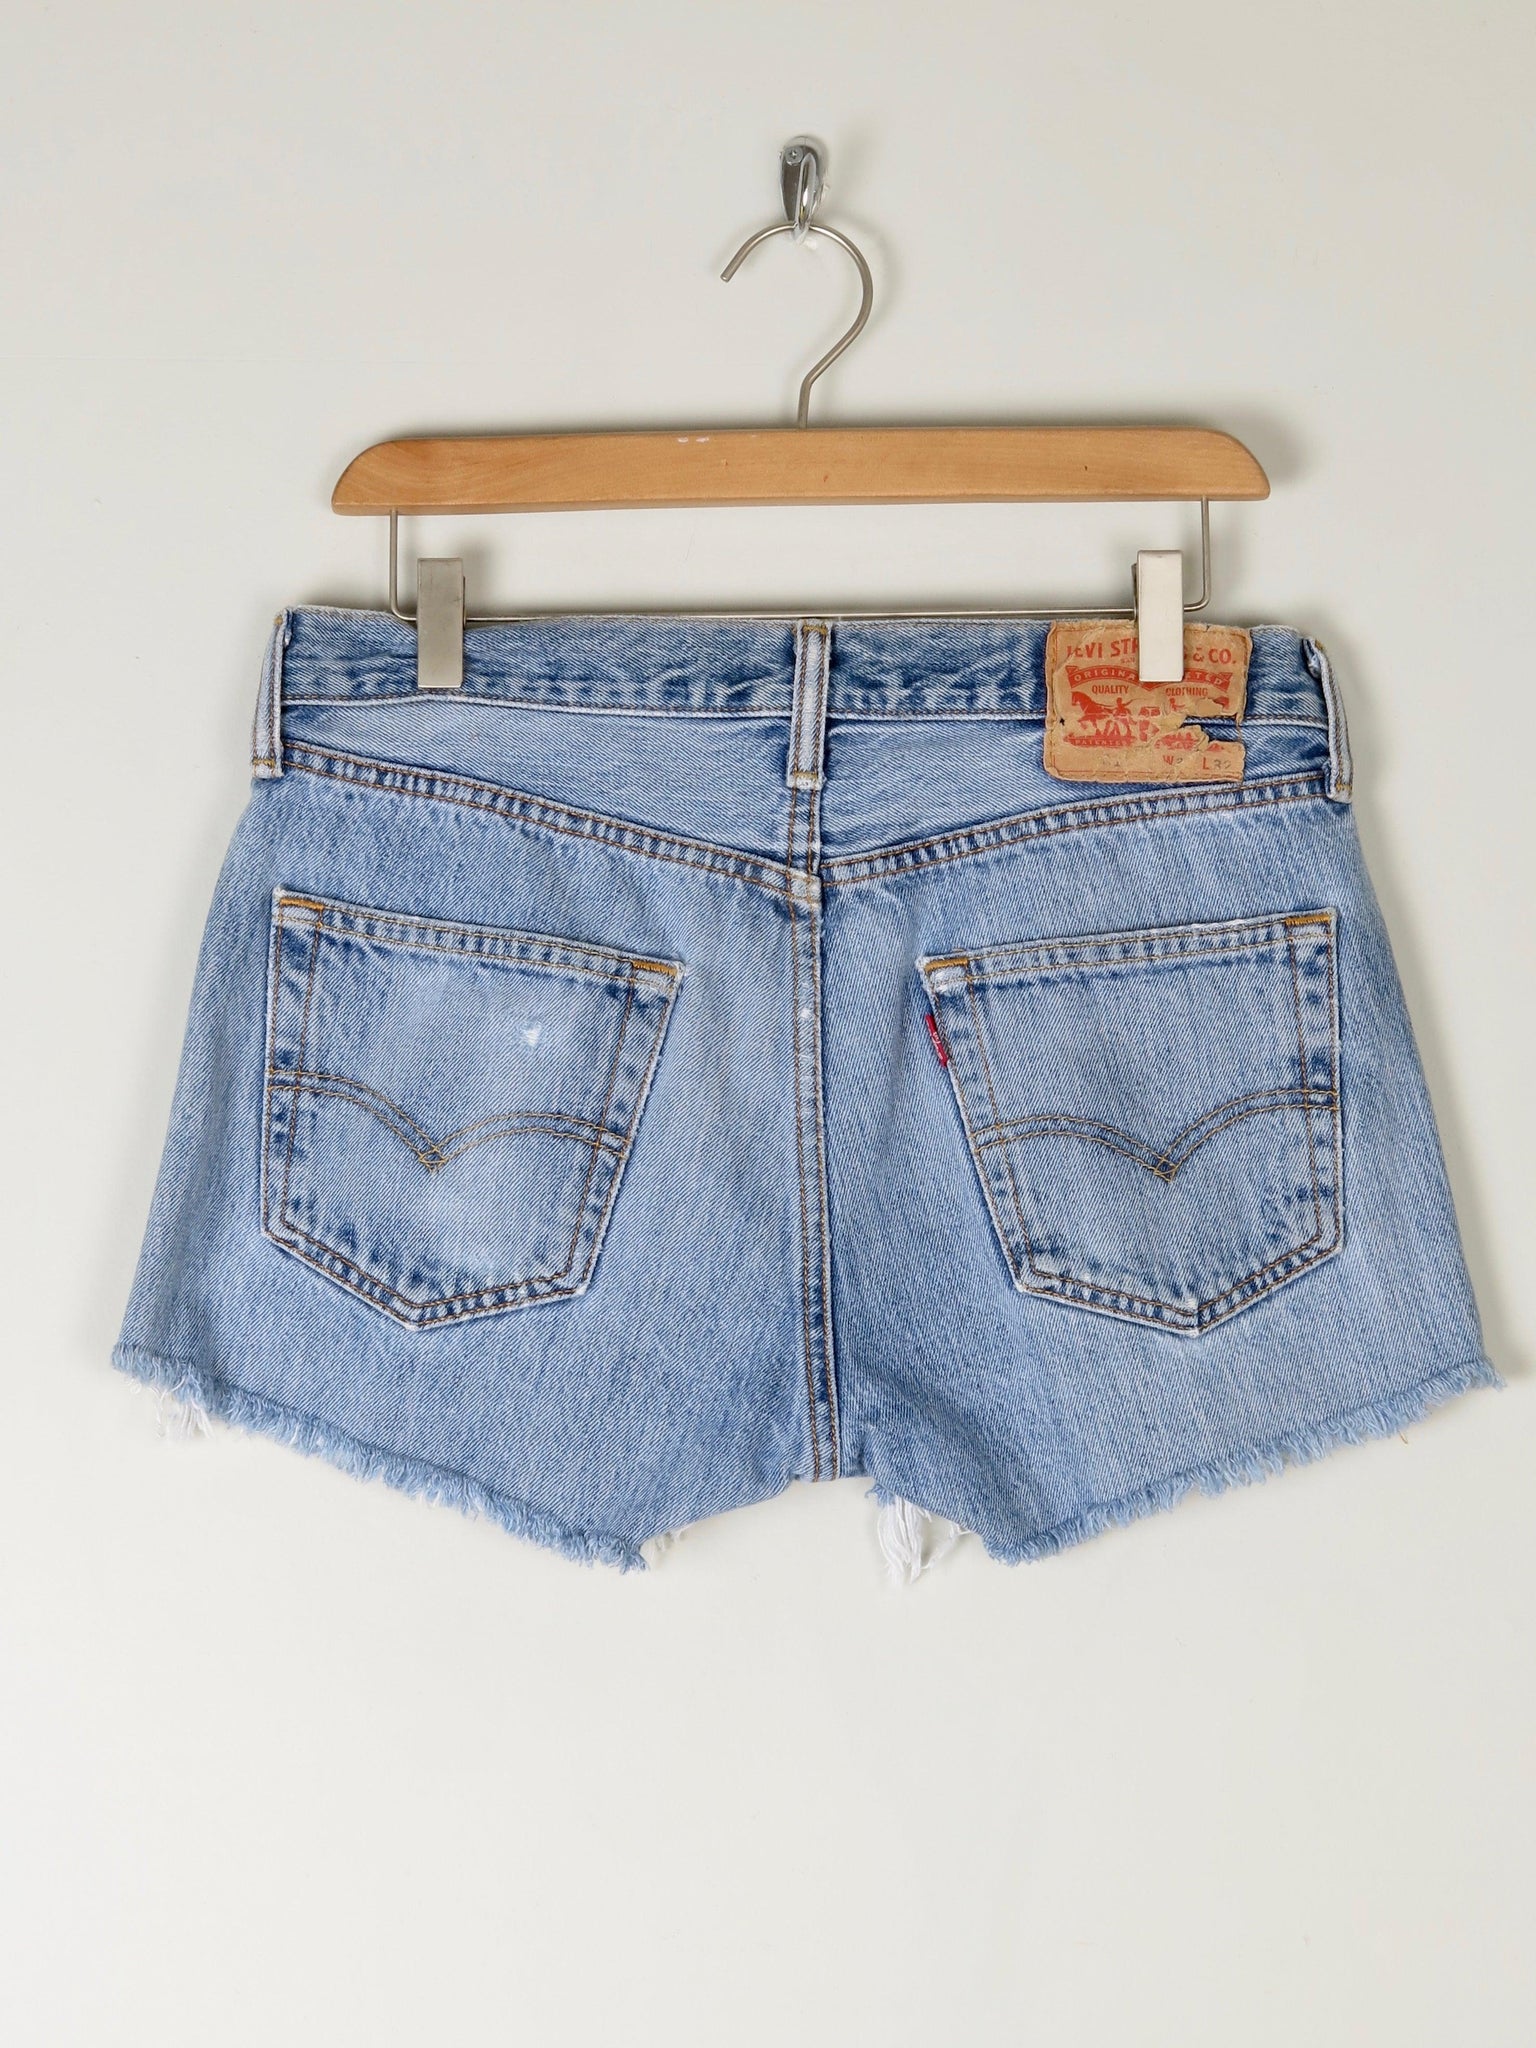 Levis Denim Shorts 31" 10/12 (Small Size 12) - The Harlequin